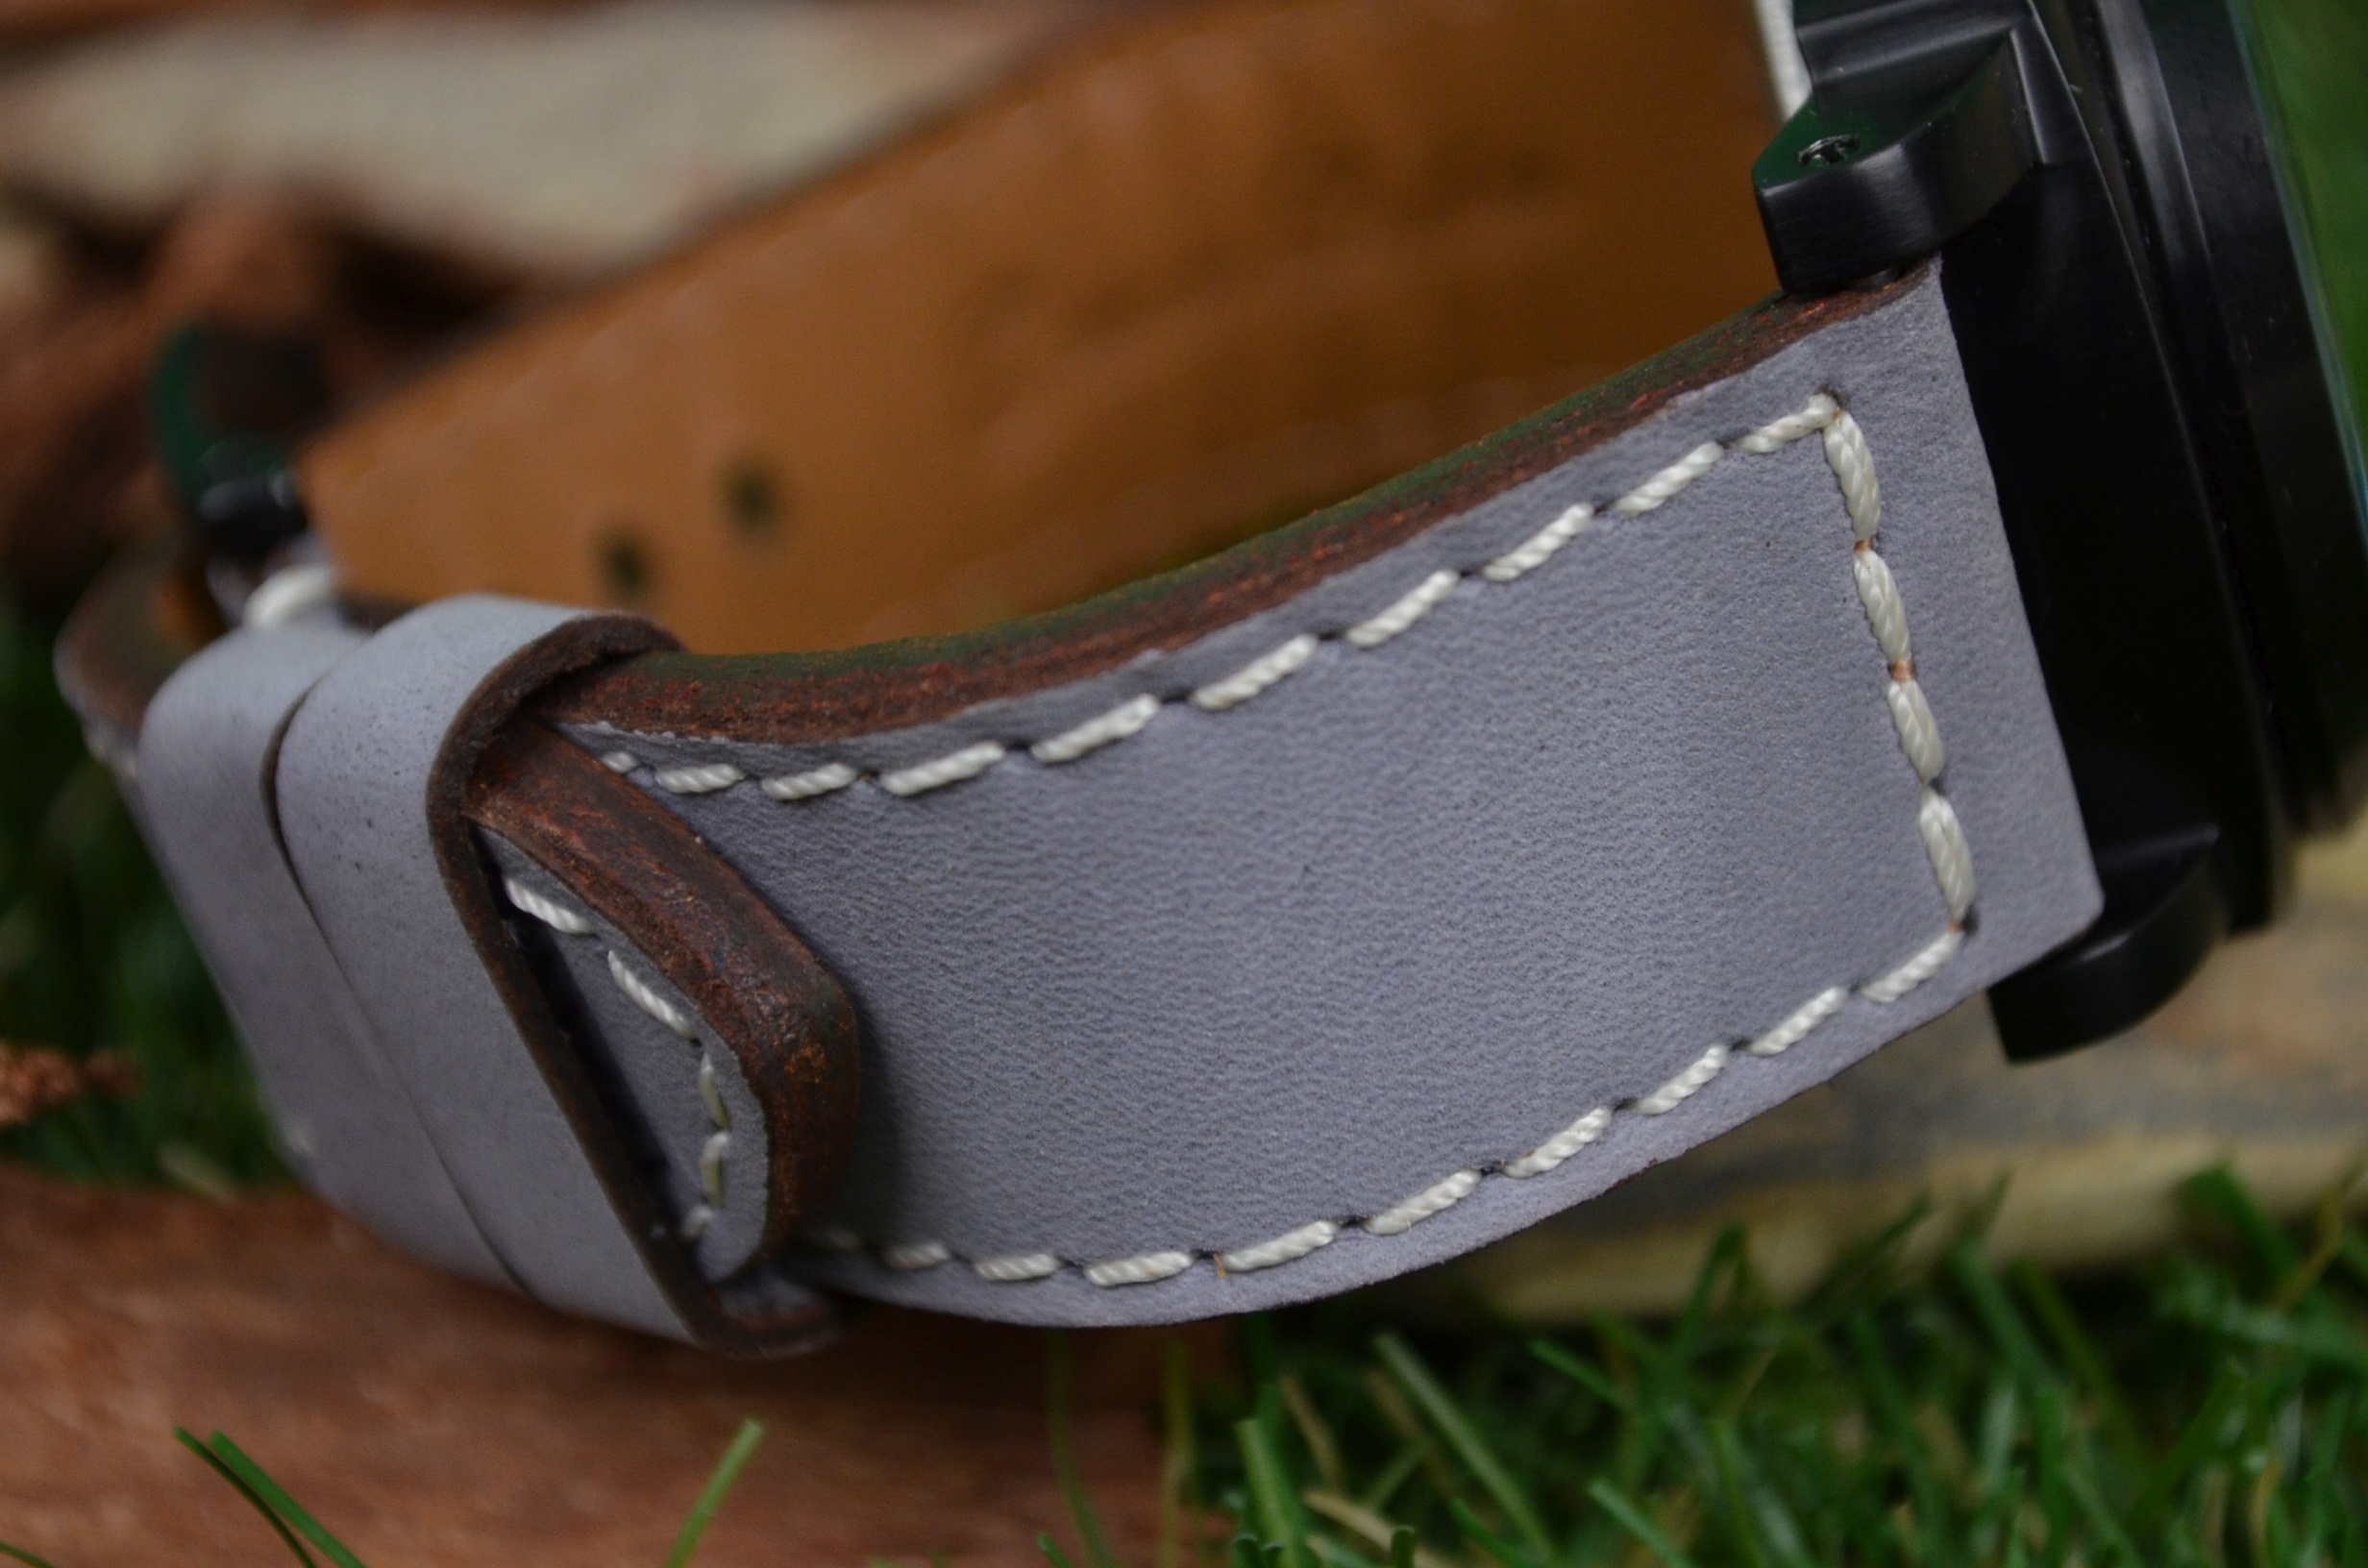 II GREY is one of our hand crafted watch straps. Available in grey color, 3.5 - 4 mm thick.